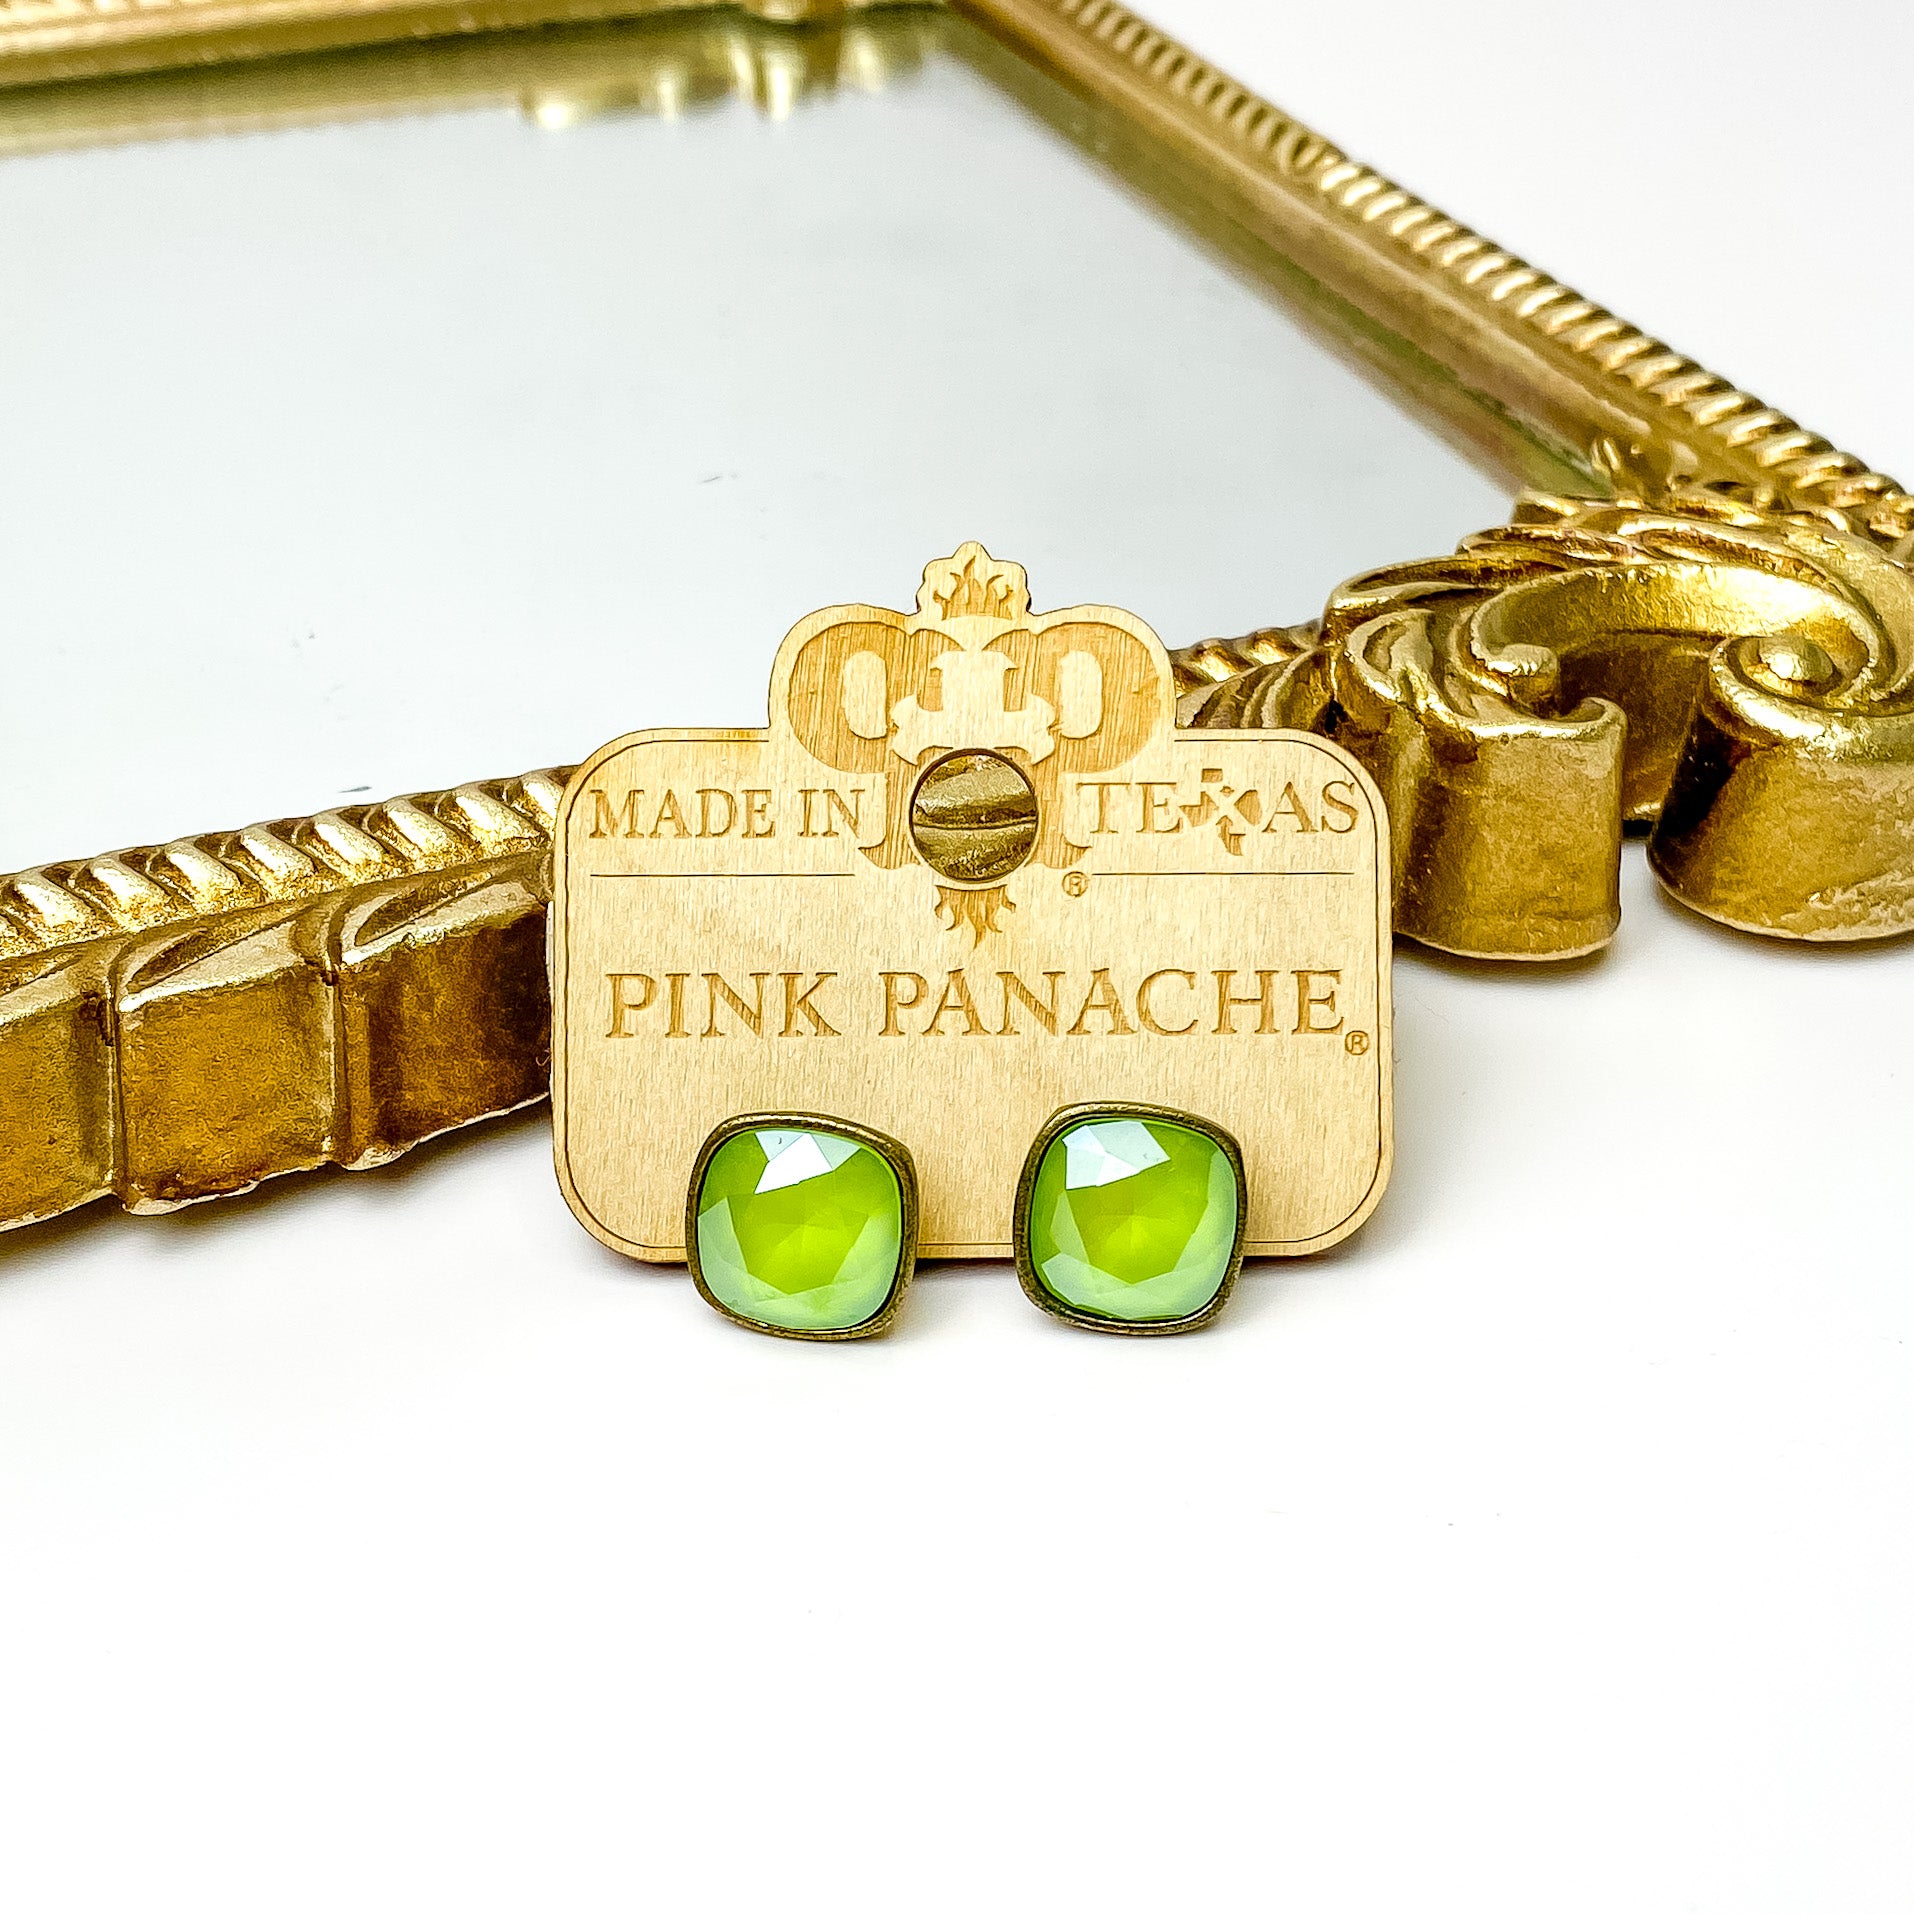 Lime green cushion cut crystal stud earrings with a bronze setting. These earrings are pictured on a Pink Panache wood holder in front of a gold mirror and on a white background. 